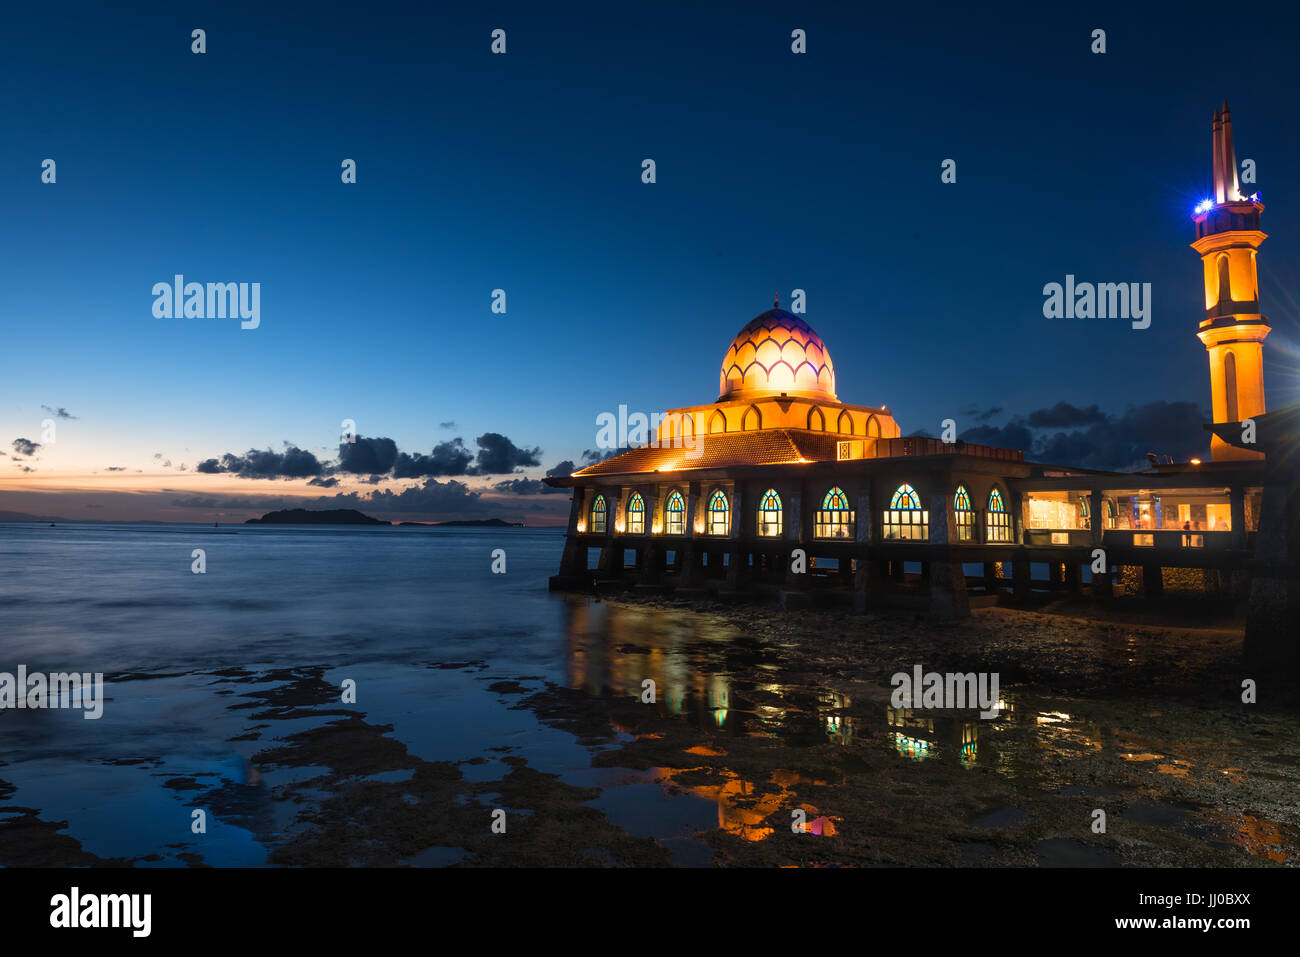 Masjid Al Hussain A Floating Mosque Extends Over The Straits Of Malacca In Evening At Kuala Perlis Malaysia Stock Photo Alamy